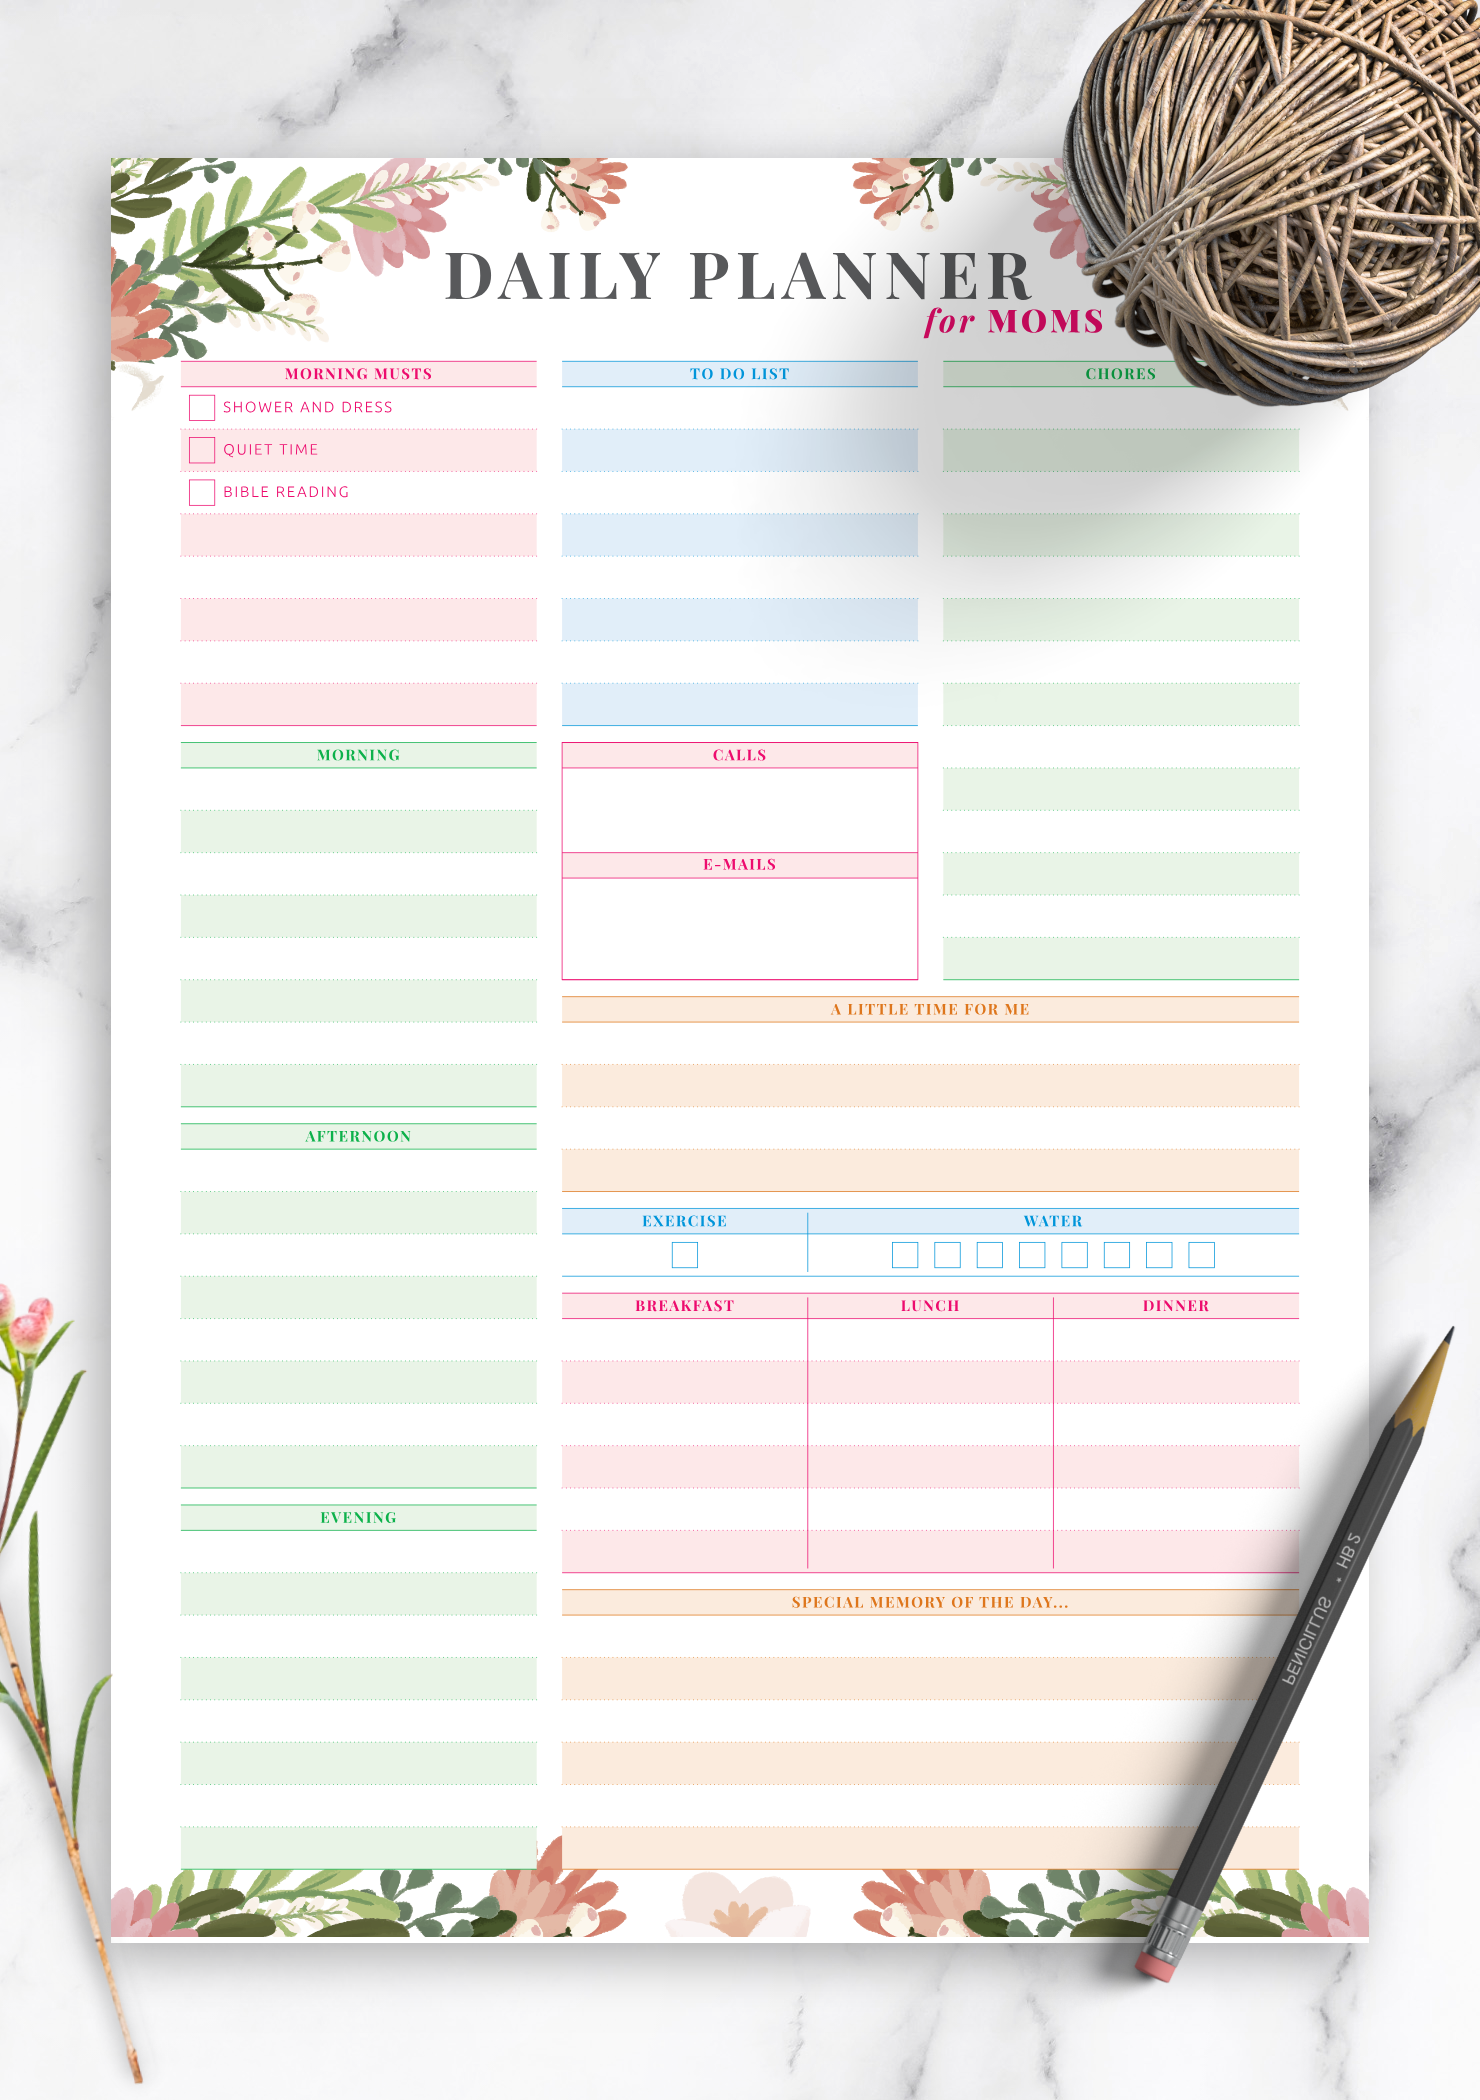 Calendars & Planners Paper & Party Supplies Weekly Family Planner Home